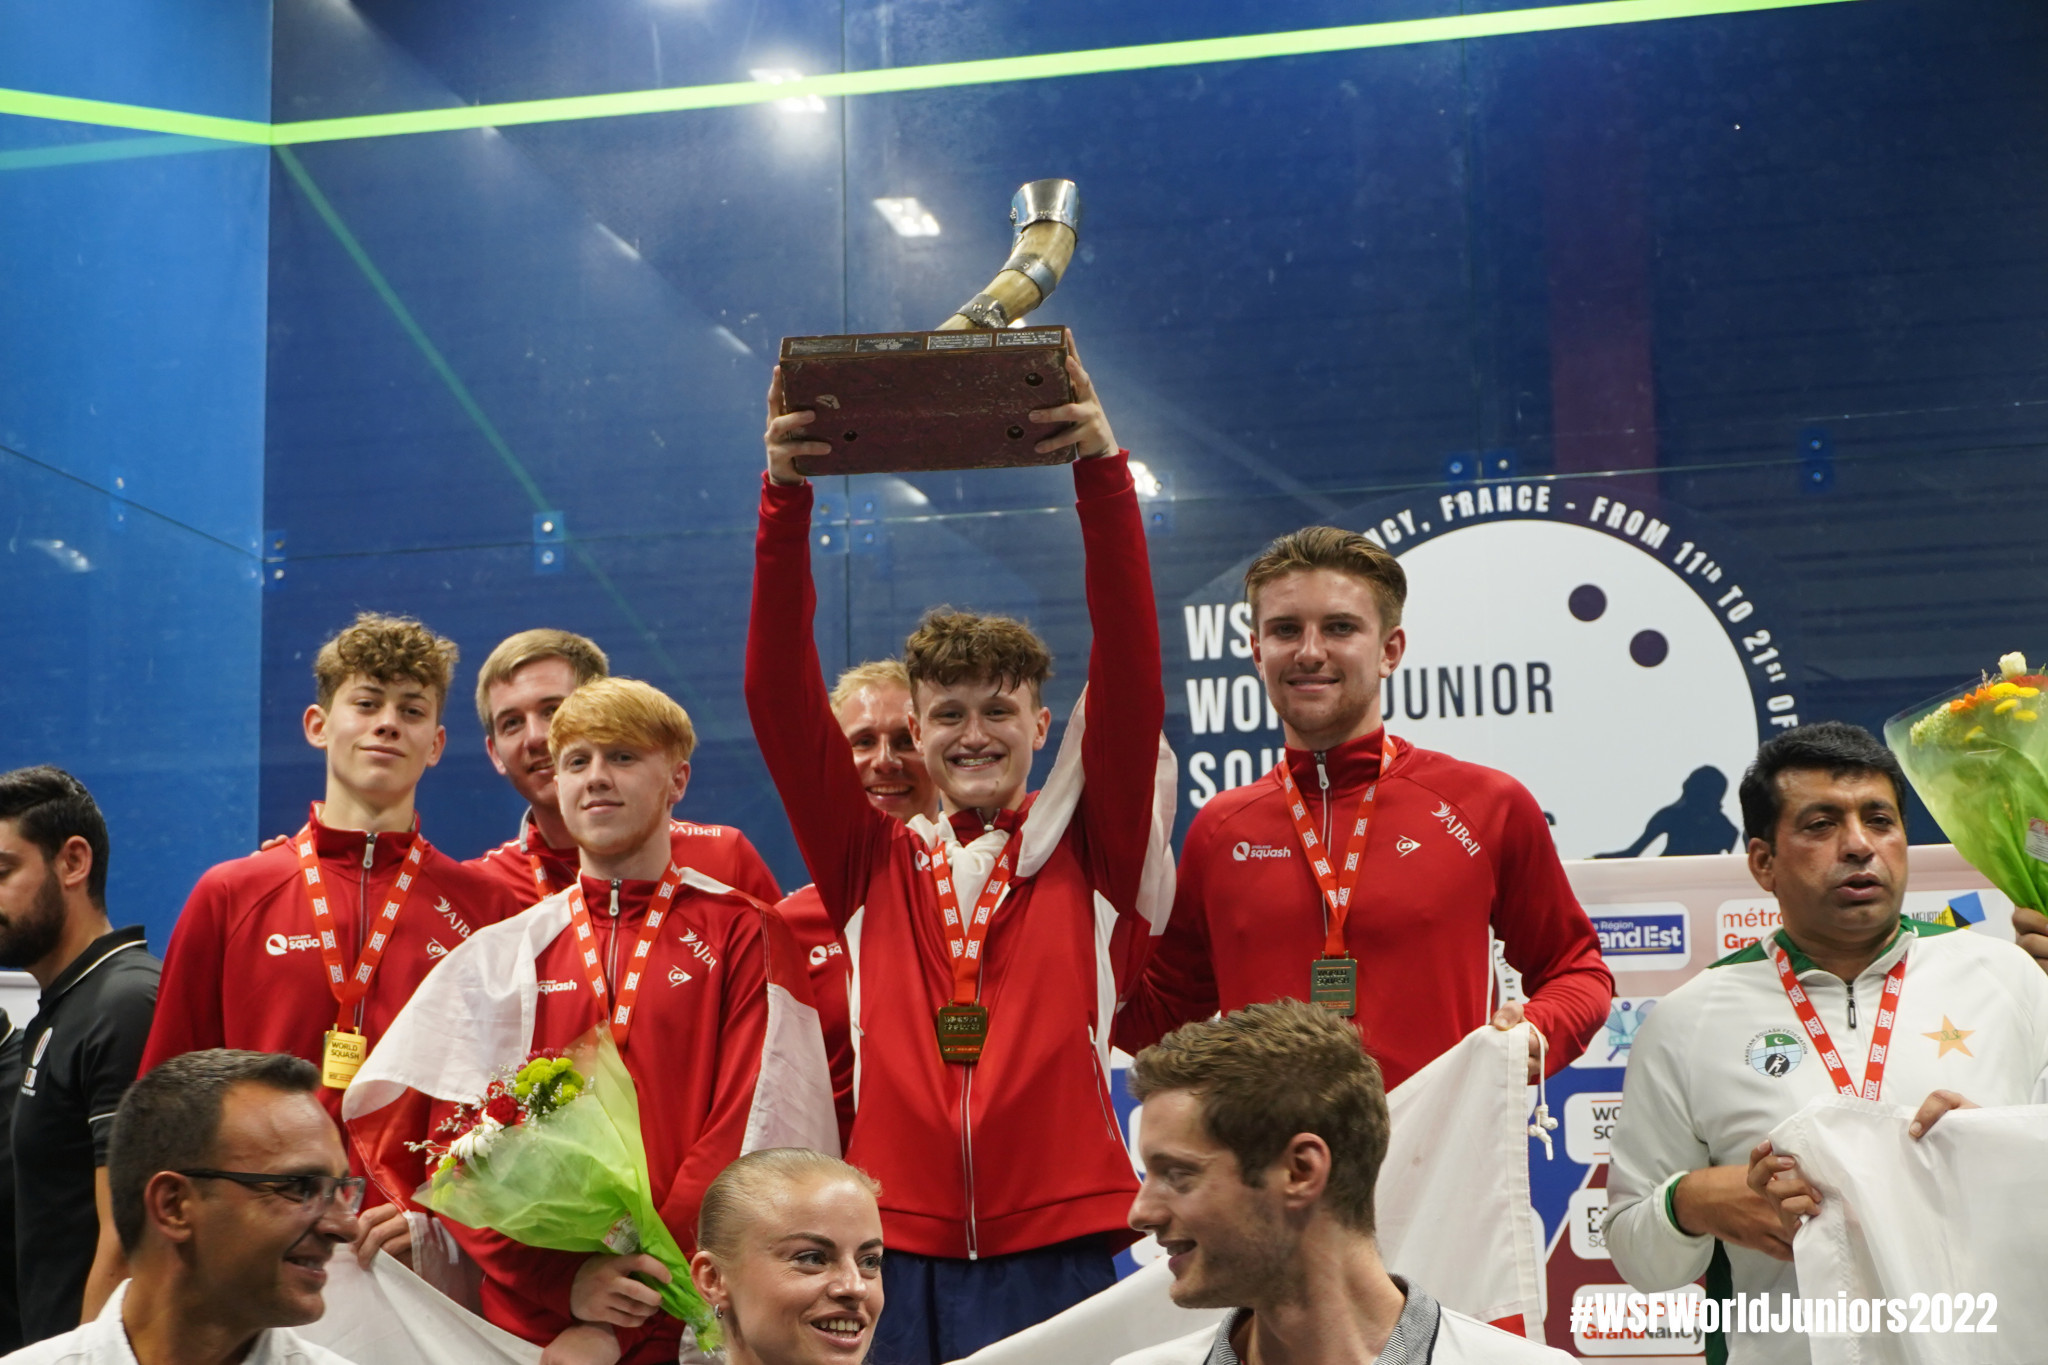 England lifted the team title at the Men's World Junior Squash Championships ©WSF